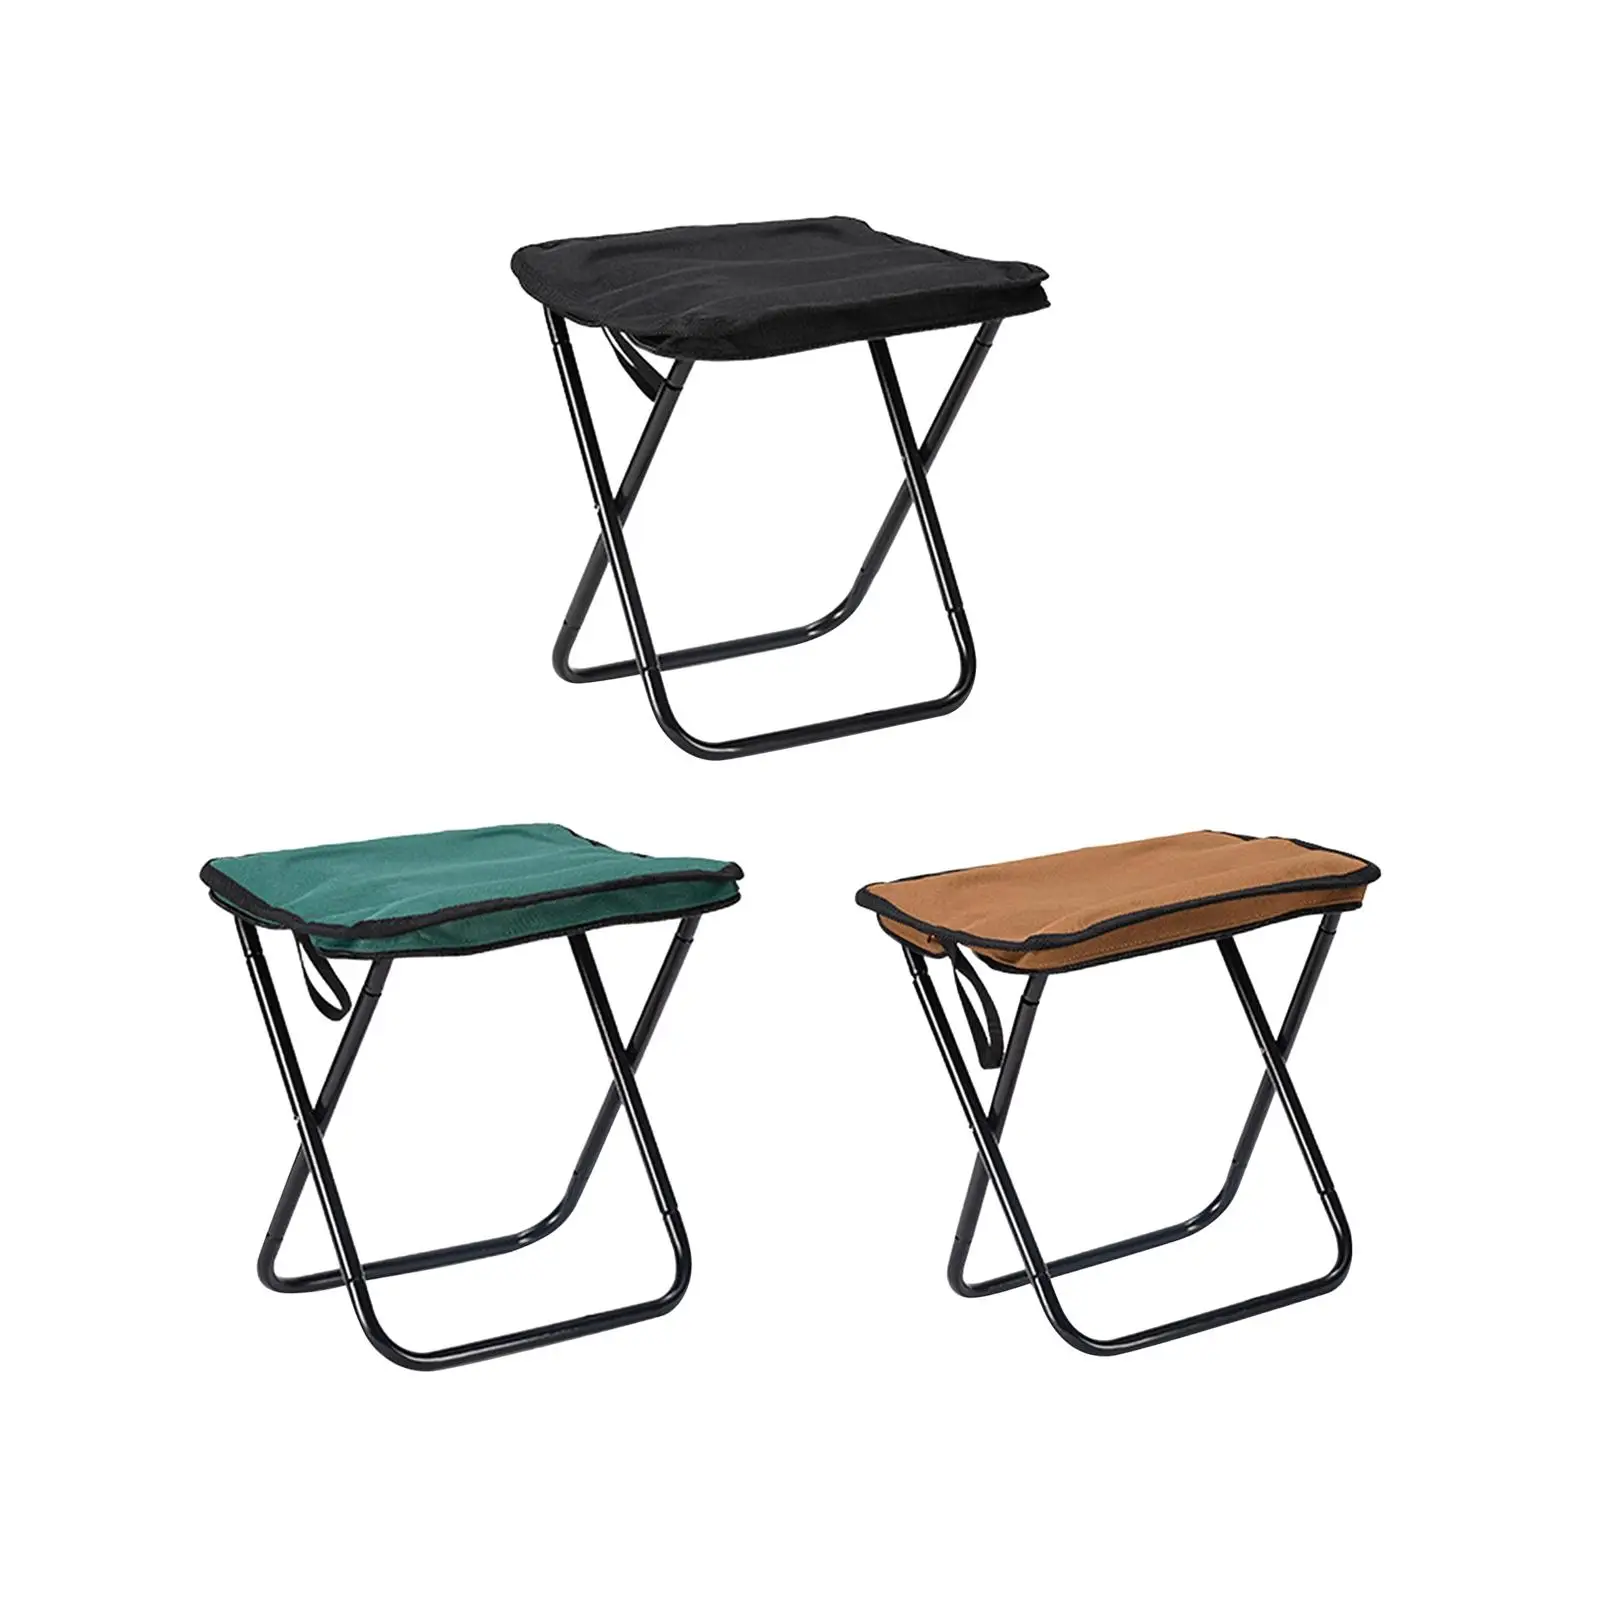 Camping Stool Seat Small Folding Chair Foldable Camping Chair Foot Rest Camp Stool Portable Folding Stool for Patio Gardening